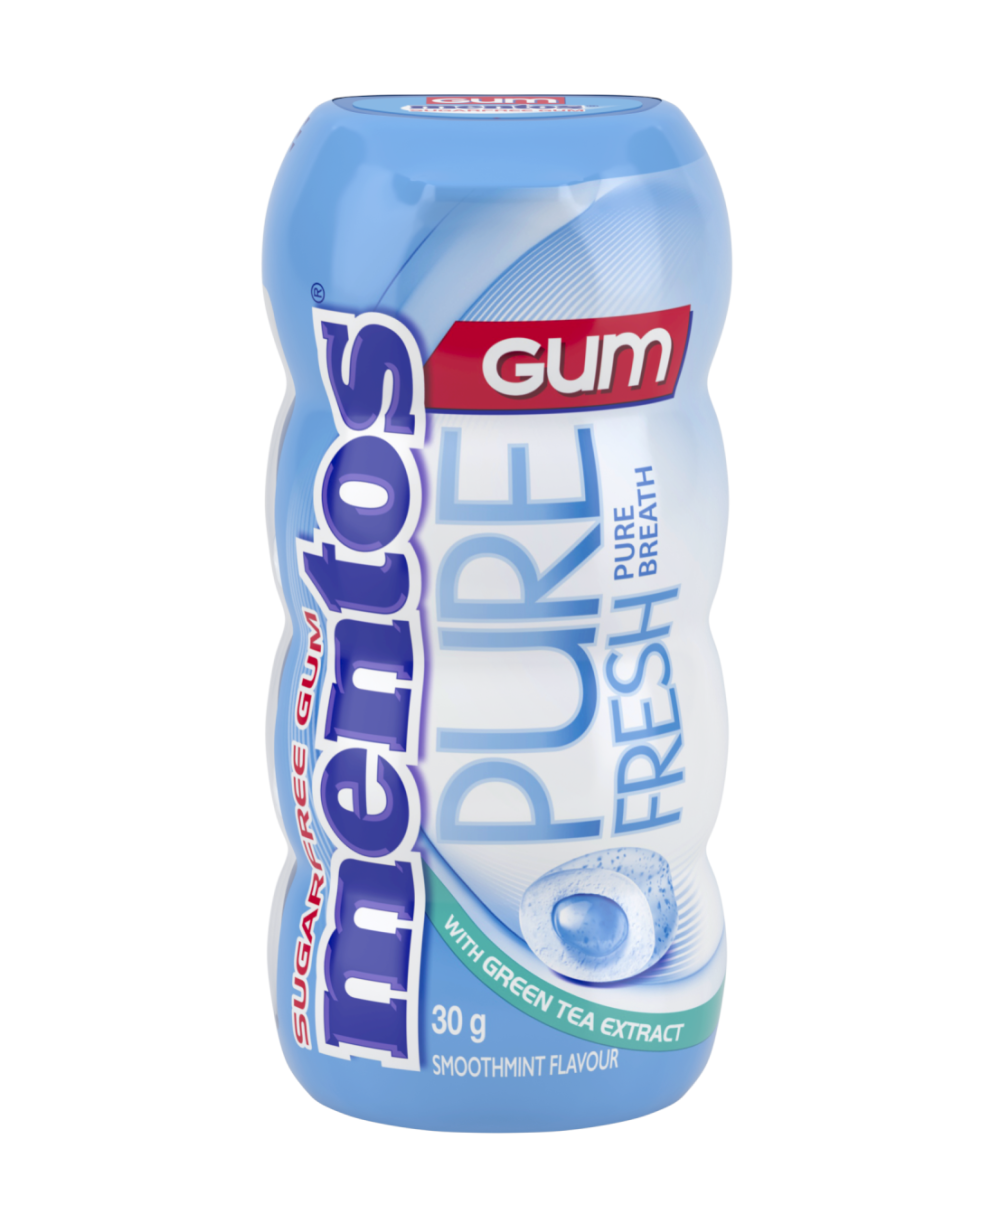 Mentos Pure Fresh Chewing Gum, Smooth Mint 30g (Box of 10)